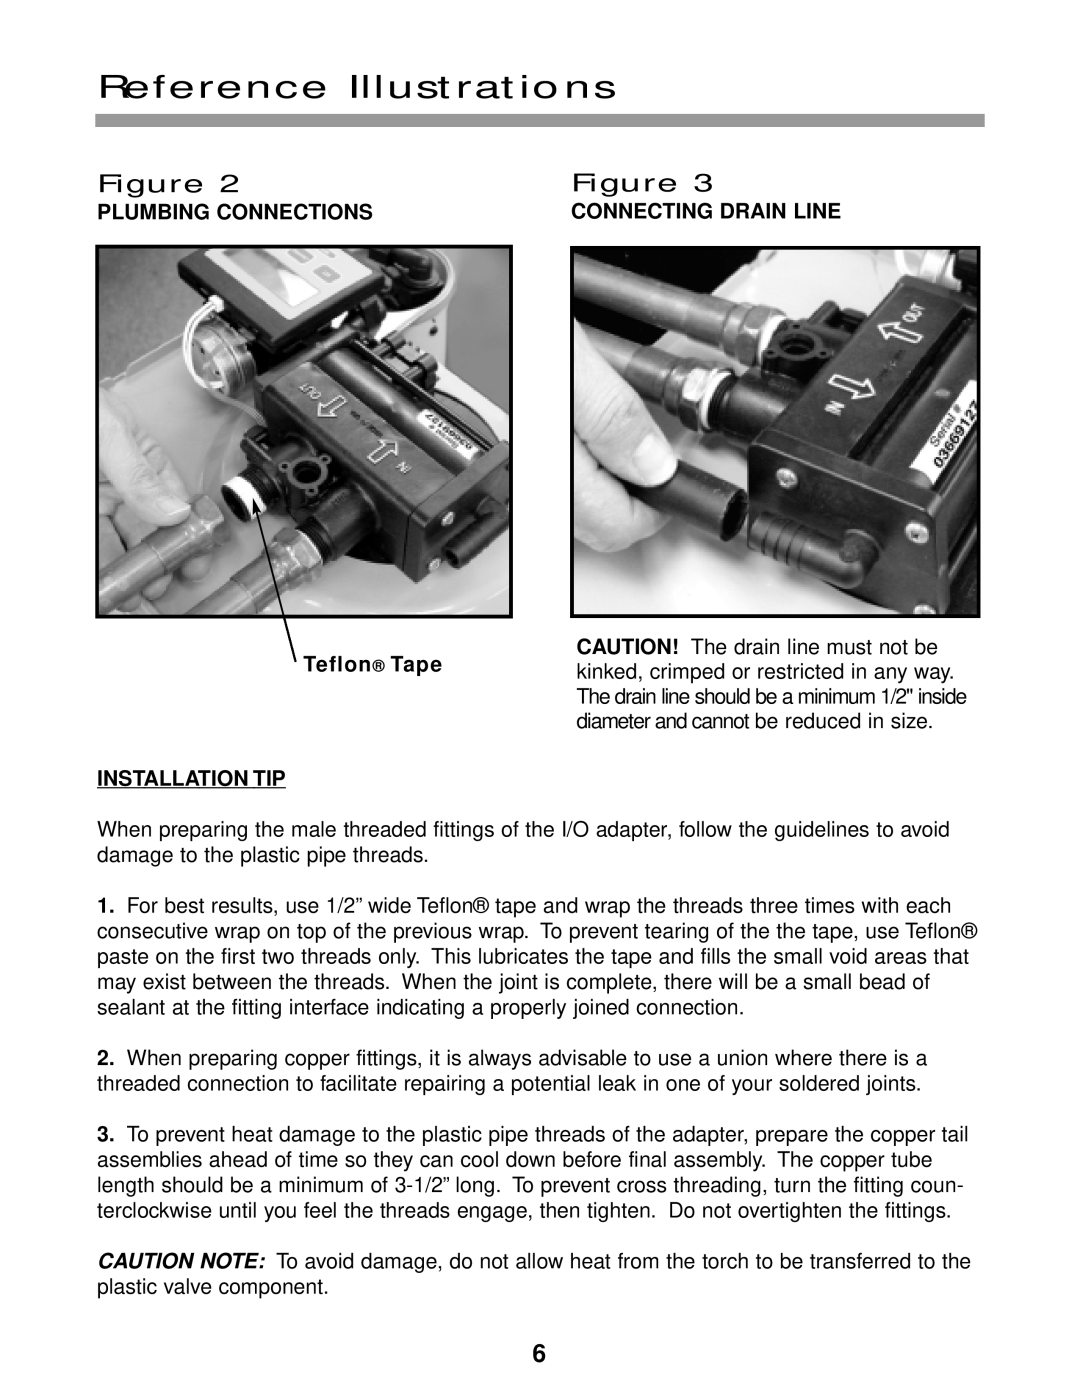 Water Boss 700 Figure, Reference Illustrations, PLUMBING CONNECTIONS Teflon Tape INSTALLATION TIP, Connecting Drain Line 